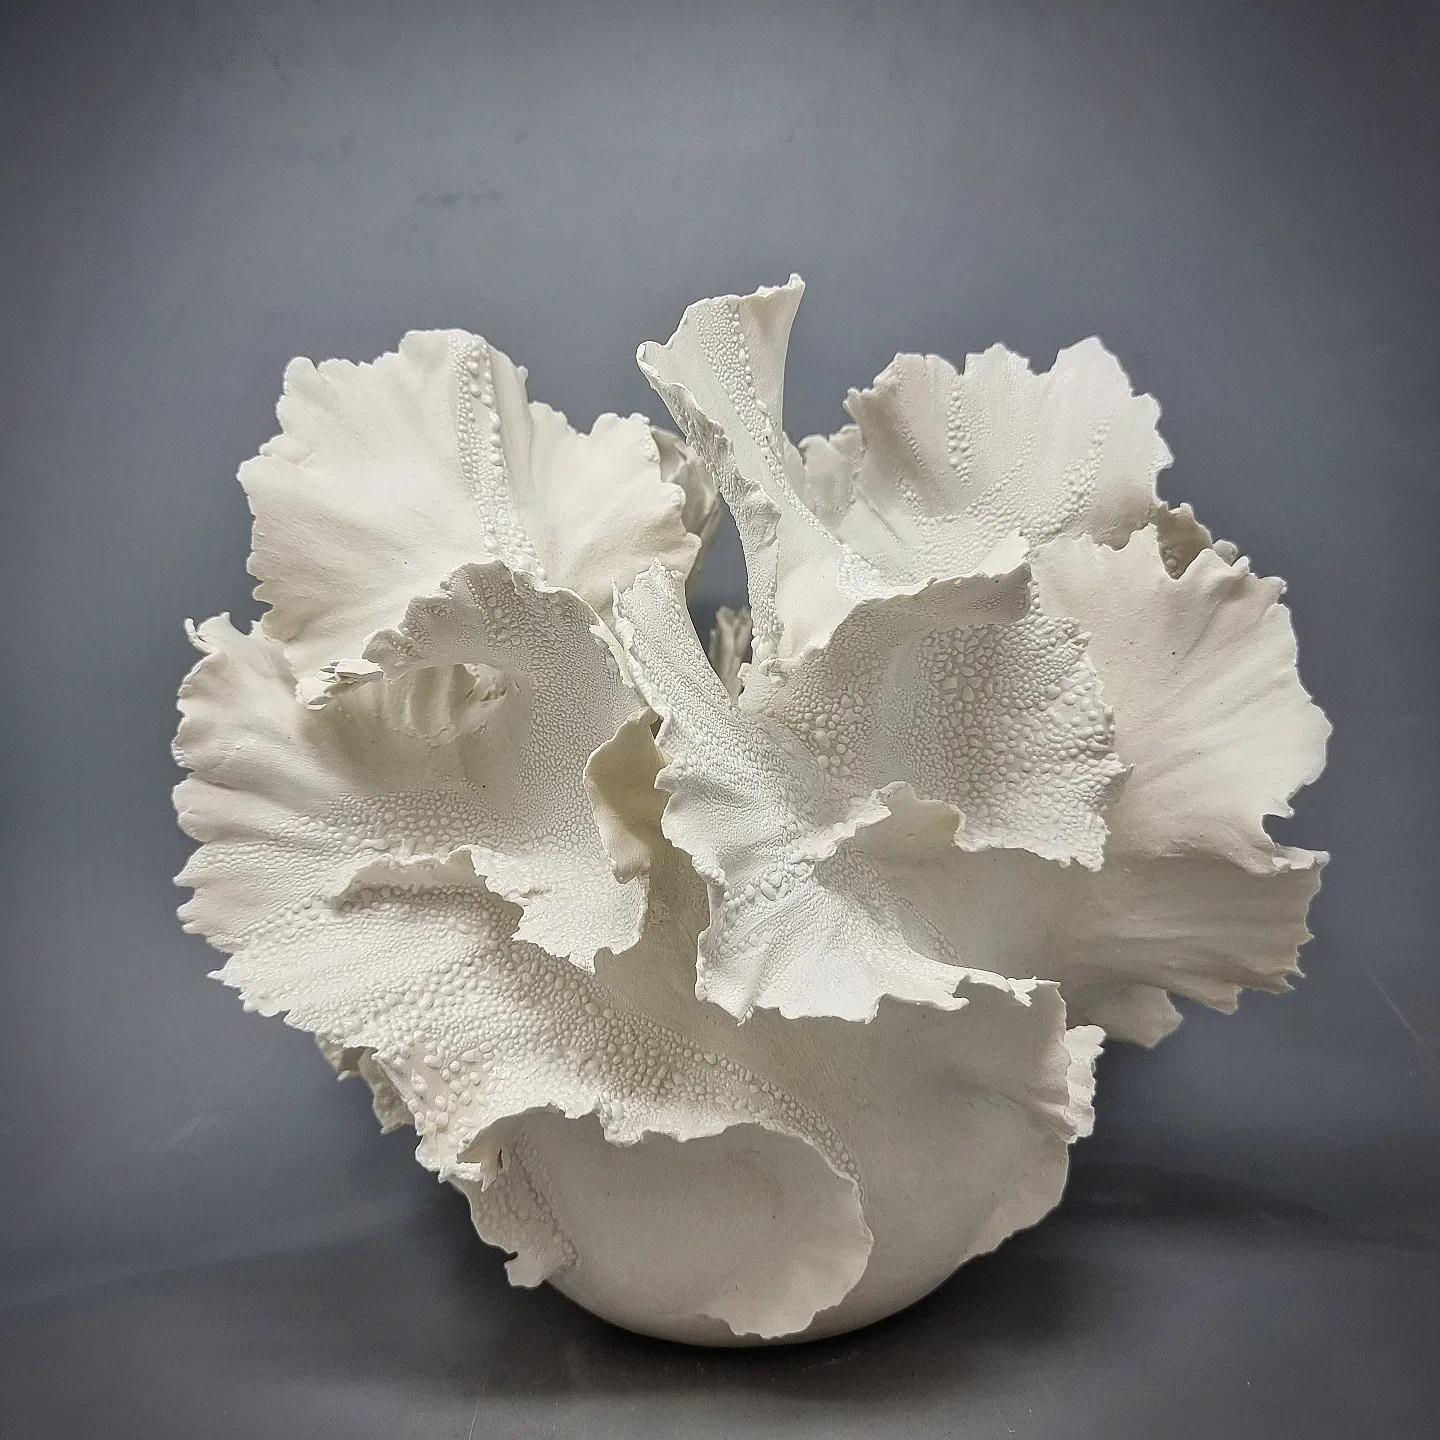 Handbuilt paperporcelain sculpture in shape of a vase. This is from the 